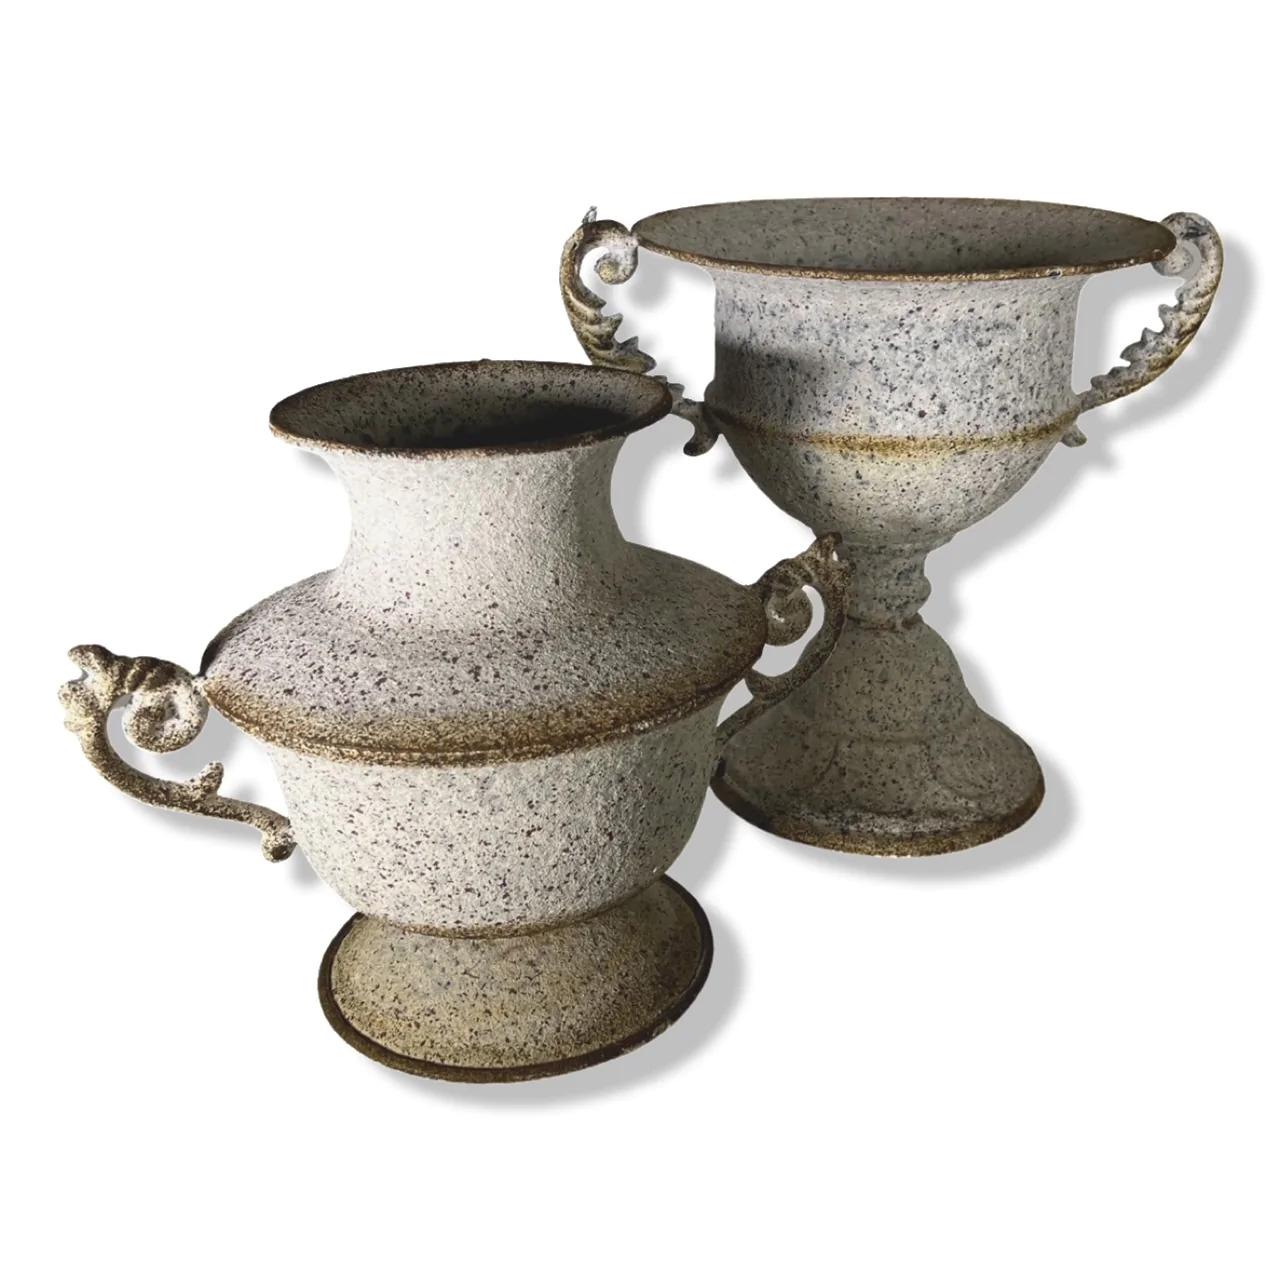 This delightful pair of Province styled urns feature a textured patina and ornate handles. They are handcrafted from metal and have been artificially 'aged', to enhance their charm. They would be beautifully suited to holding large bunches of unkept